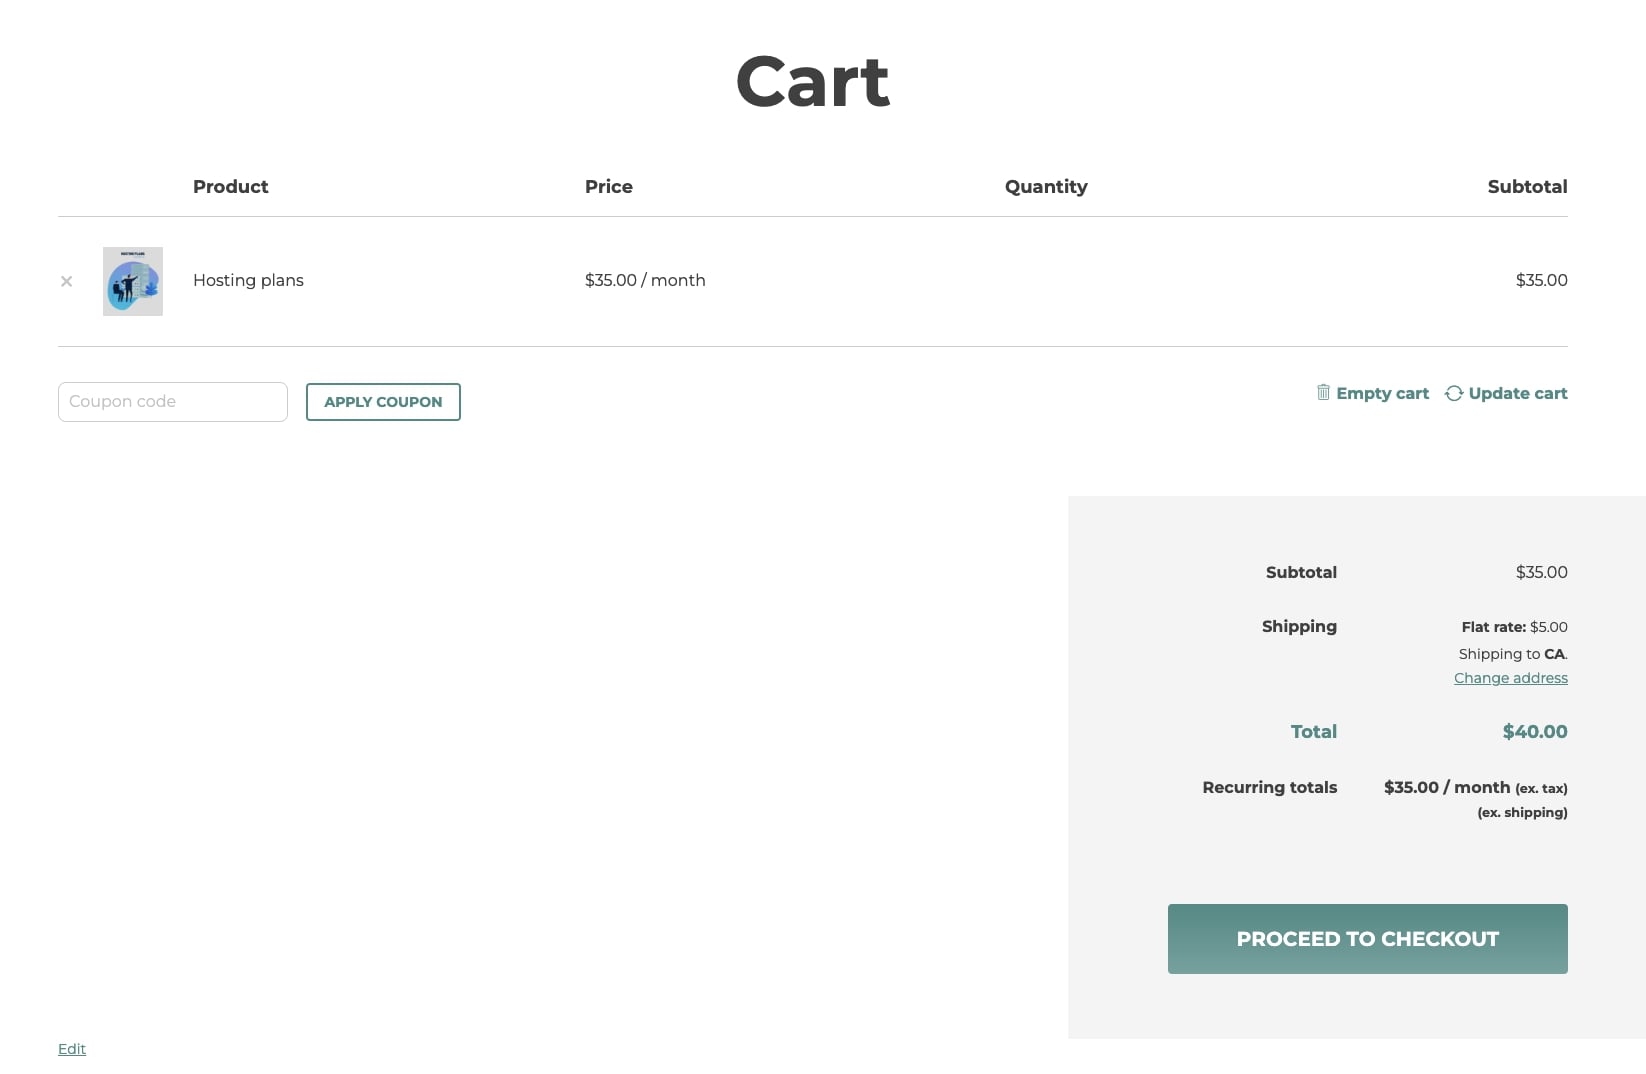 Cart page